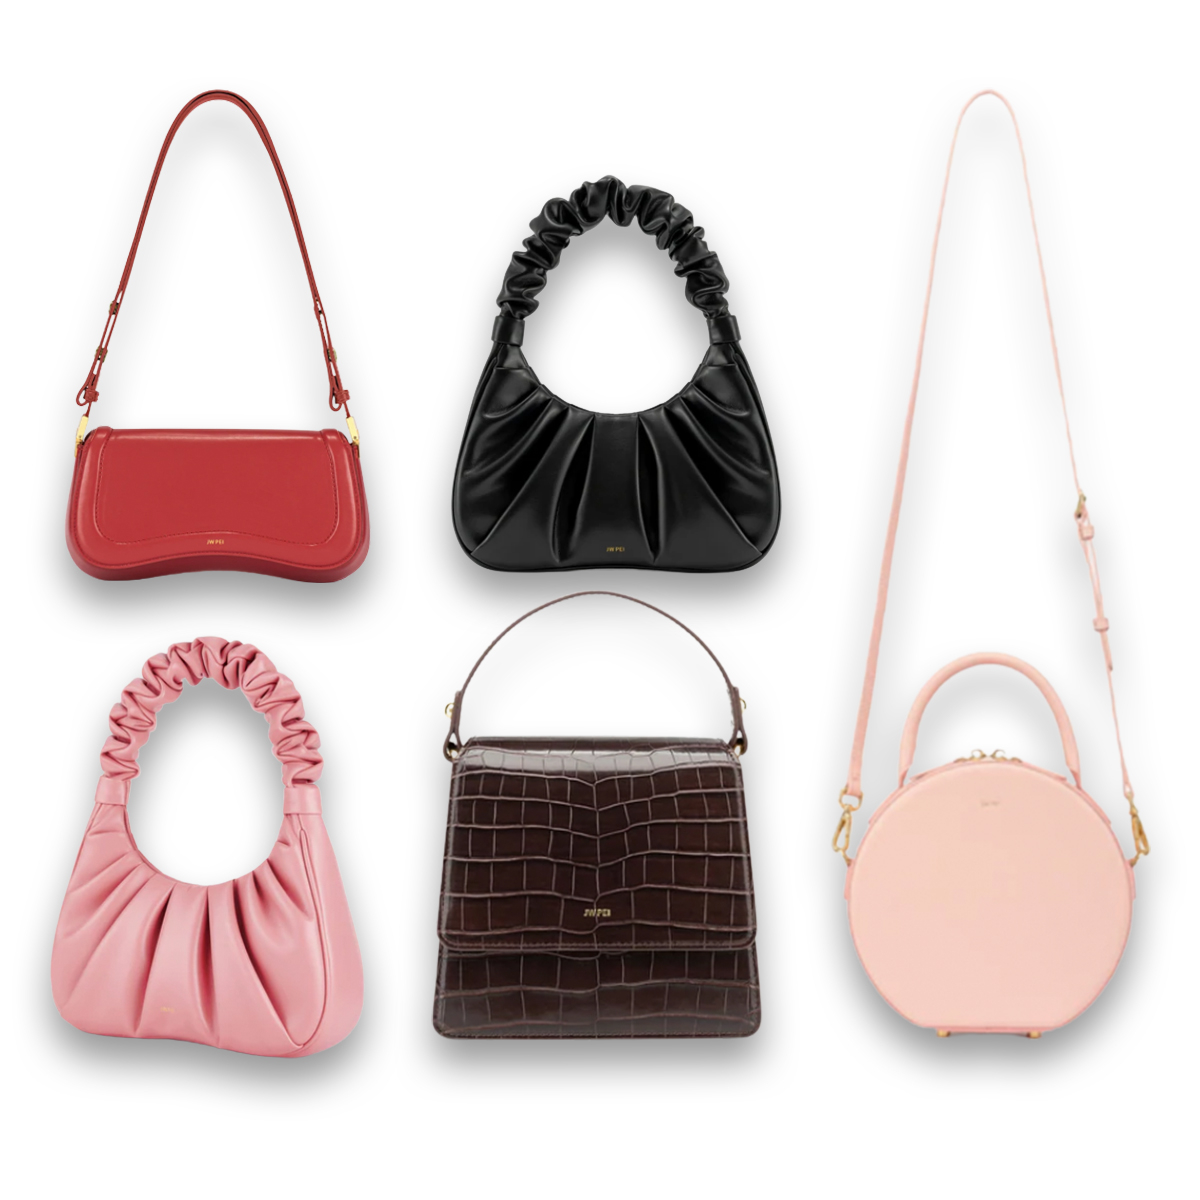 JW PEI's Bestselling Purse Just Got an Upgrade on